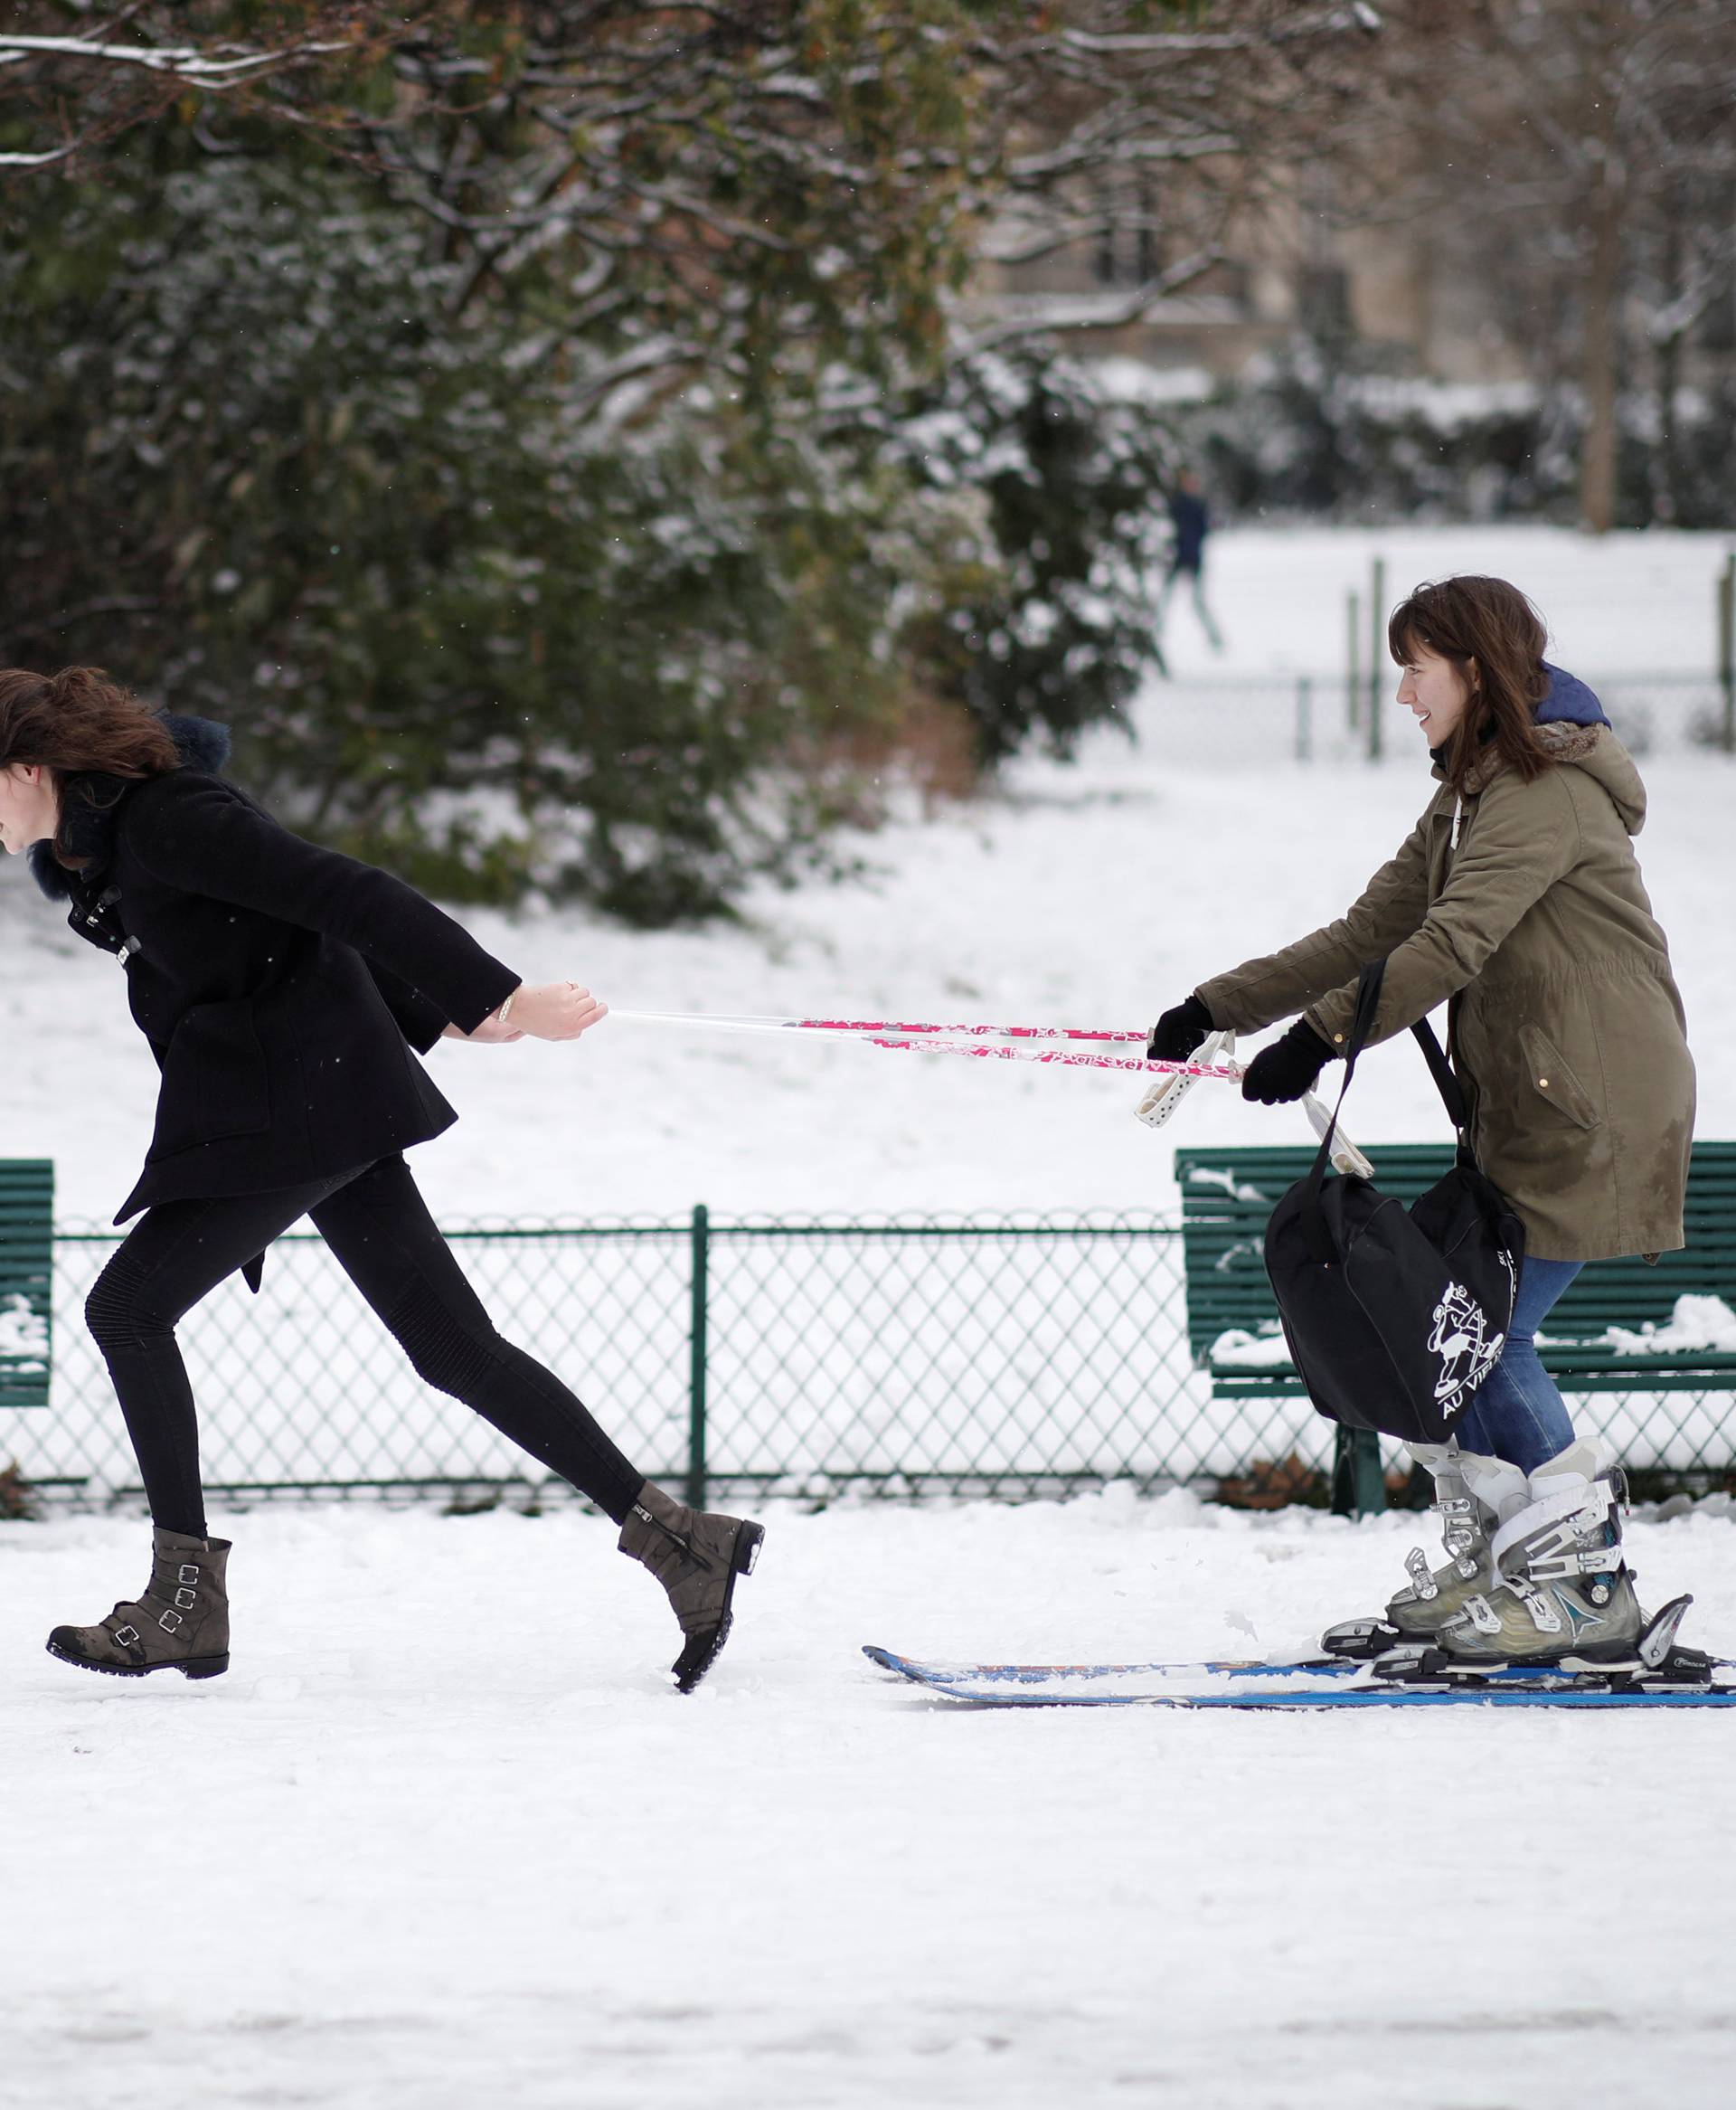 A young woman pulls another who uses skis in the Parc Monceau as winter weather bringing snow and freezing temperatures continues in Paris